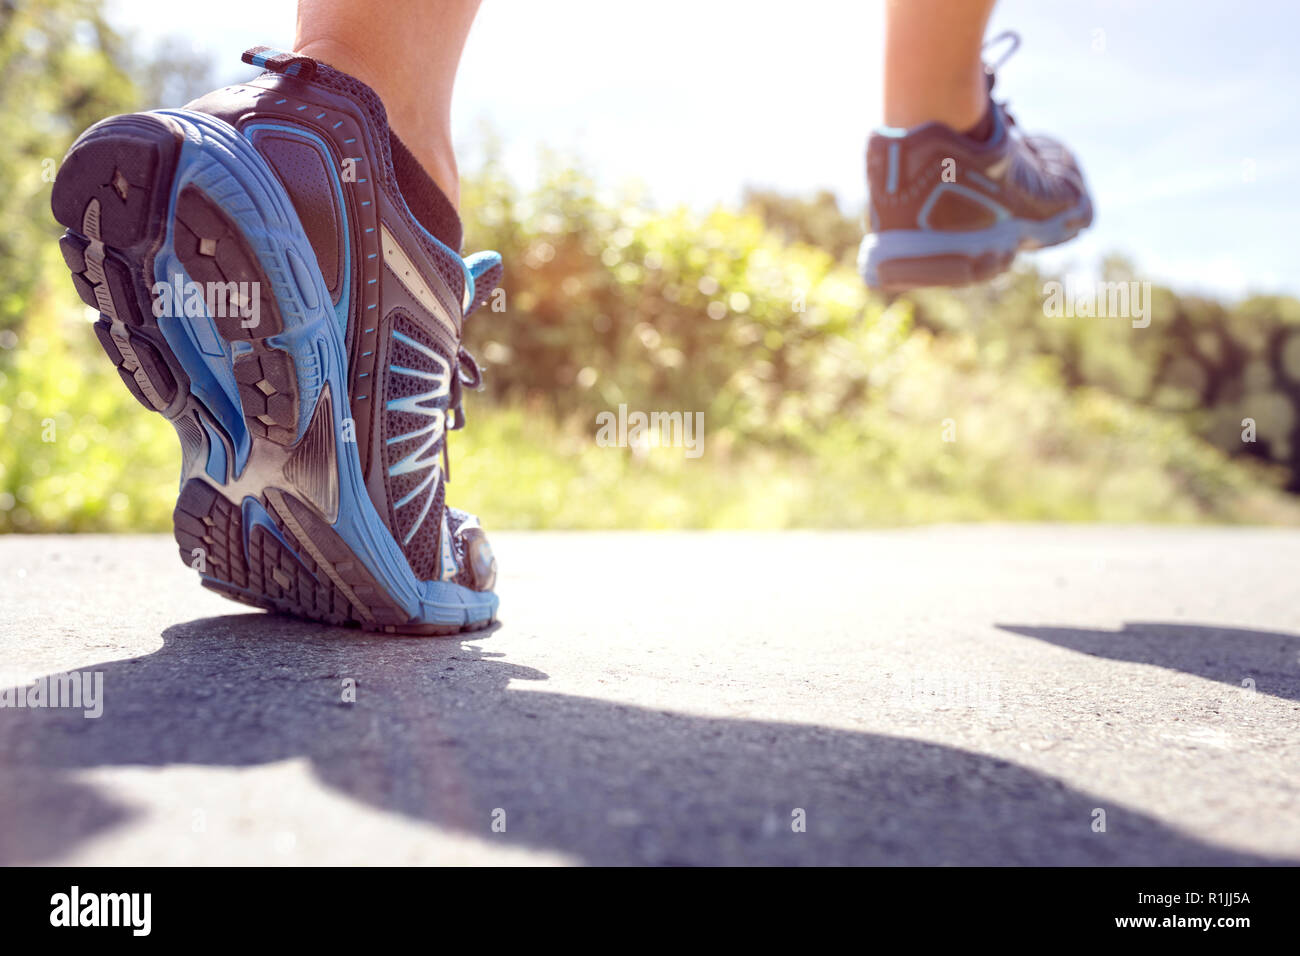 Running in summer sunshine concept for exercising, fitness and healthy lifestyle Stock Photo